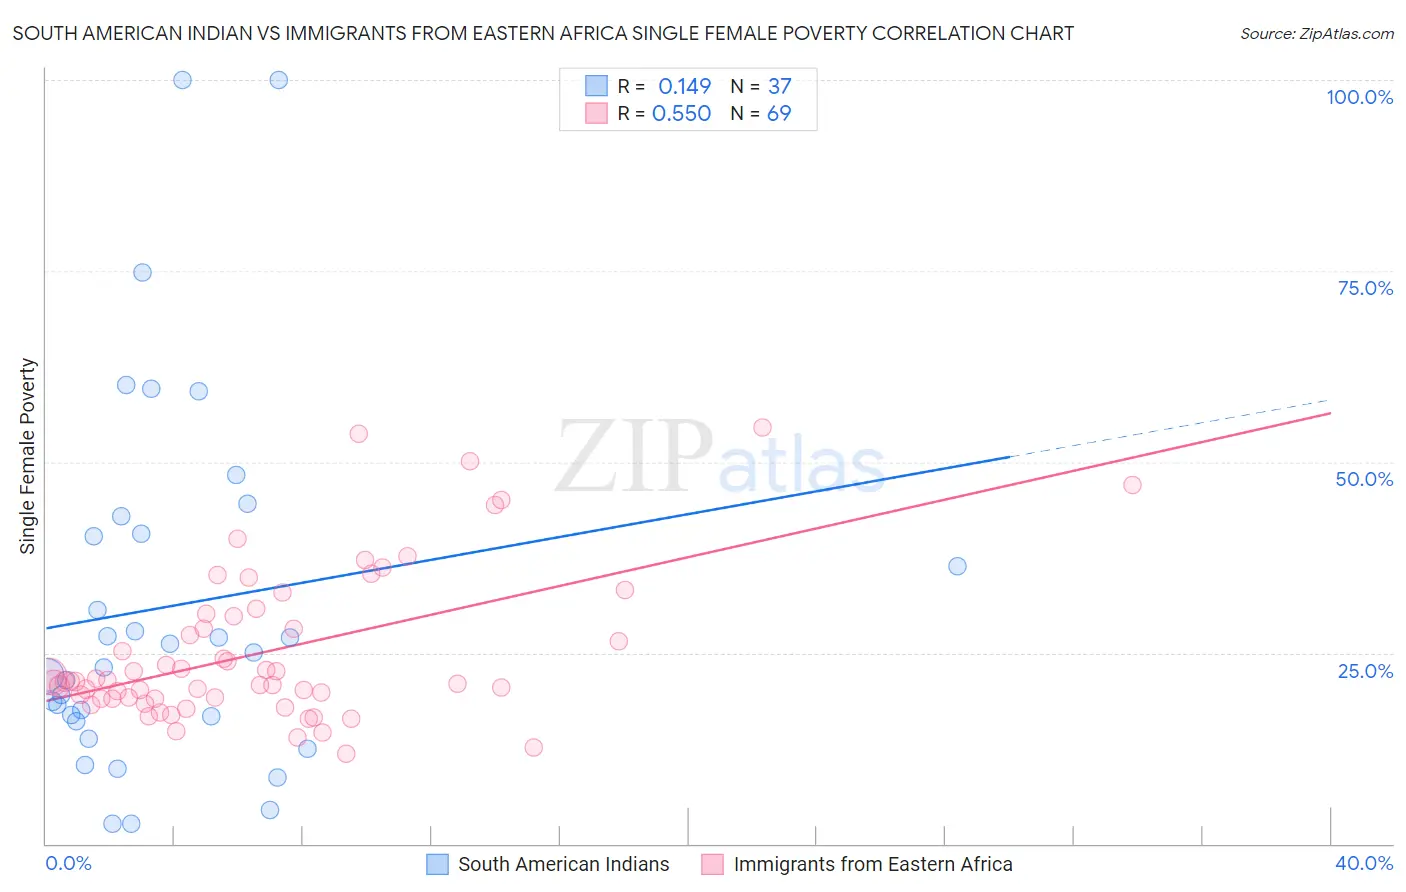 South American Indian vs Immigrants from Eastern Africa Single Female Poverty